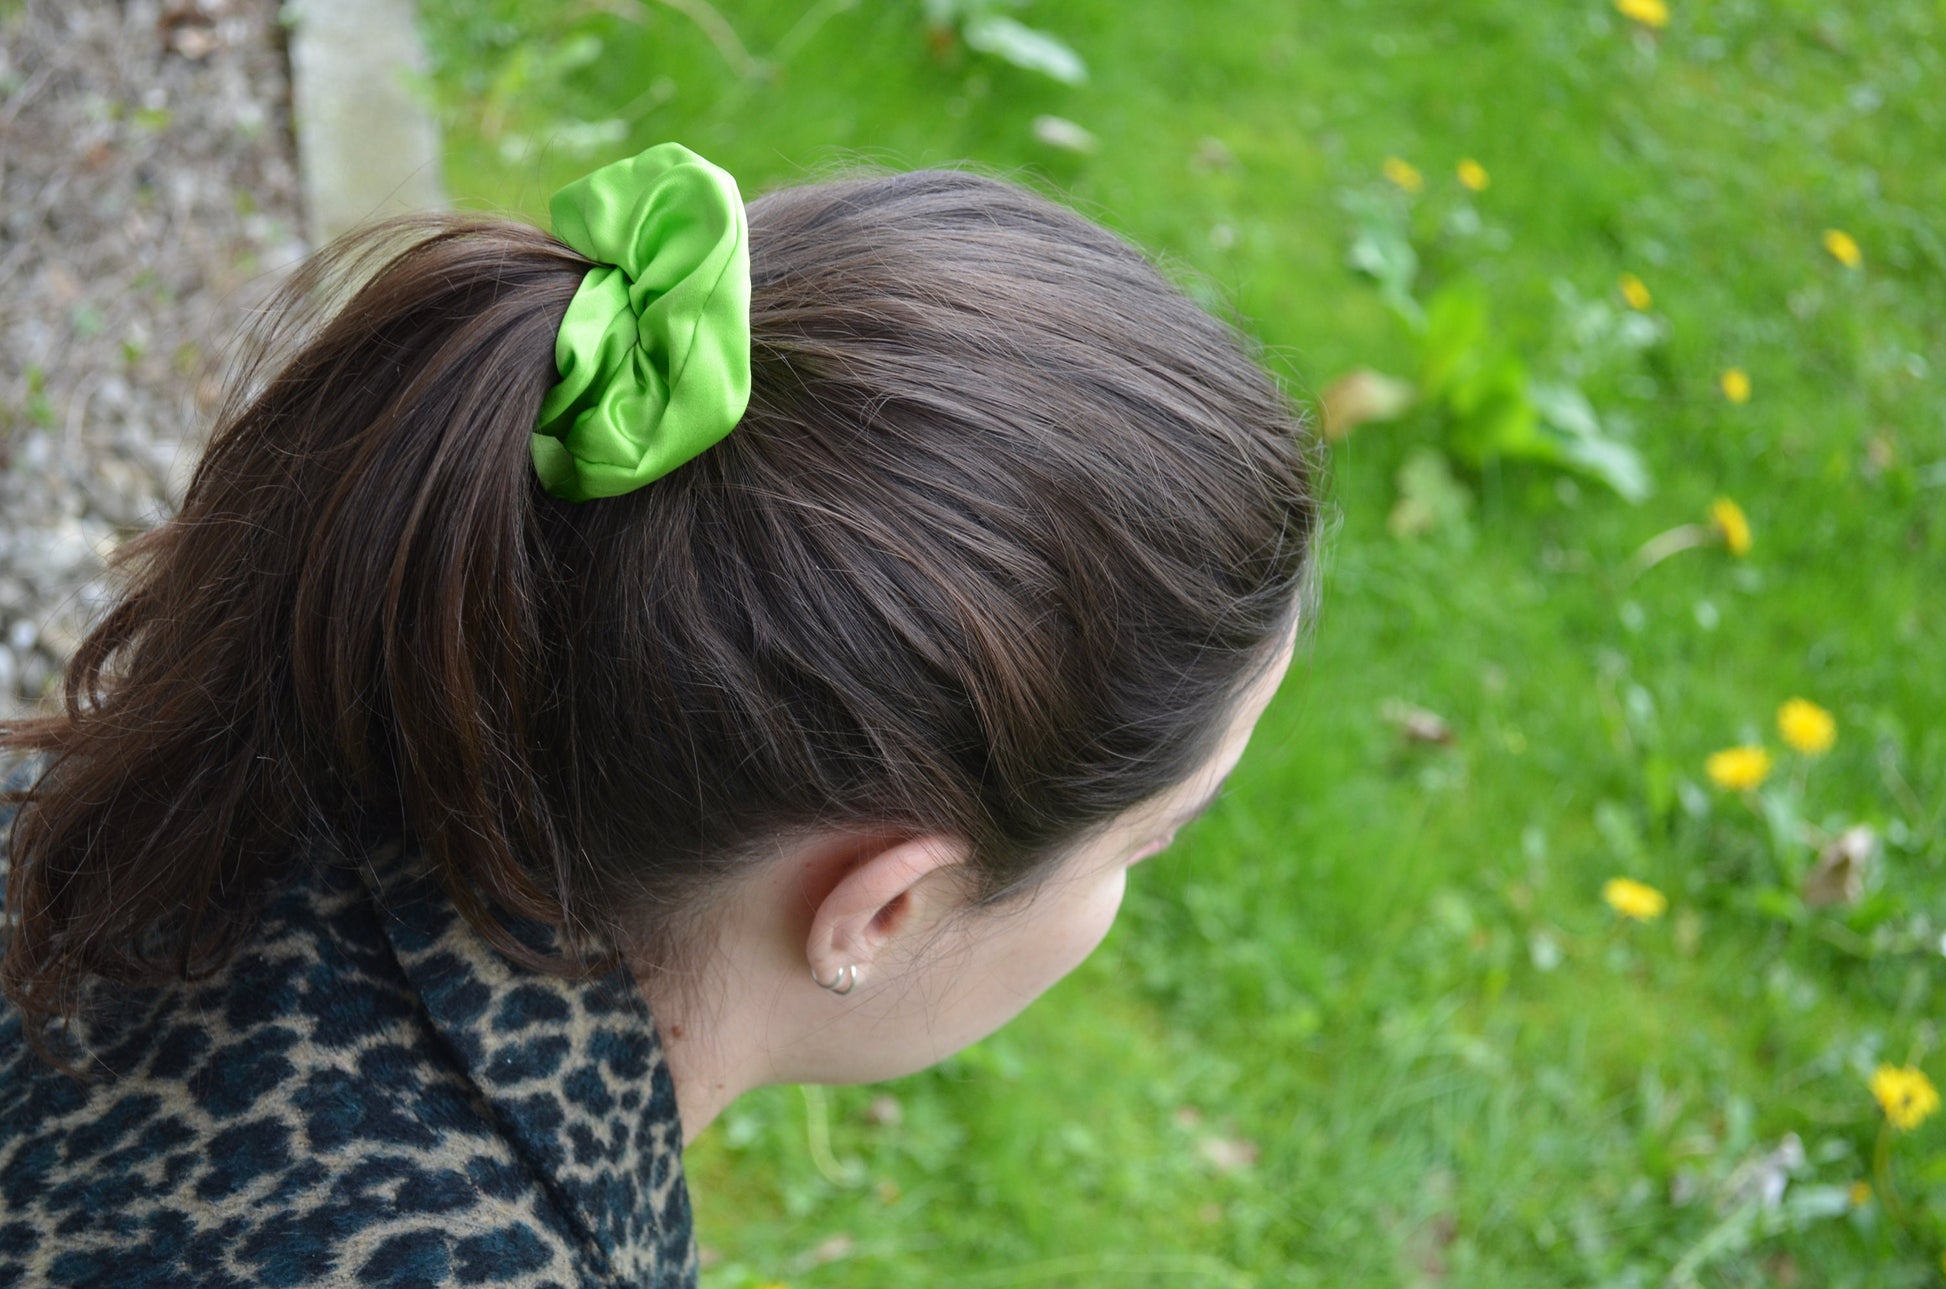 Scrunchie Depression and Mental Health Awareness, part of profit donated to Depression Charity, handmade gift for her, silk hair accessory